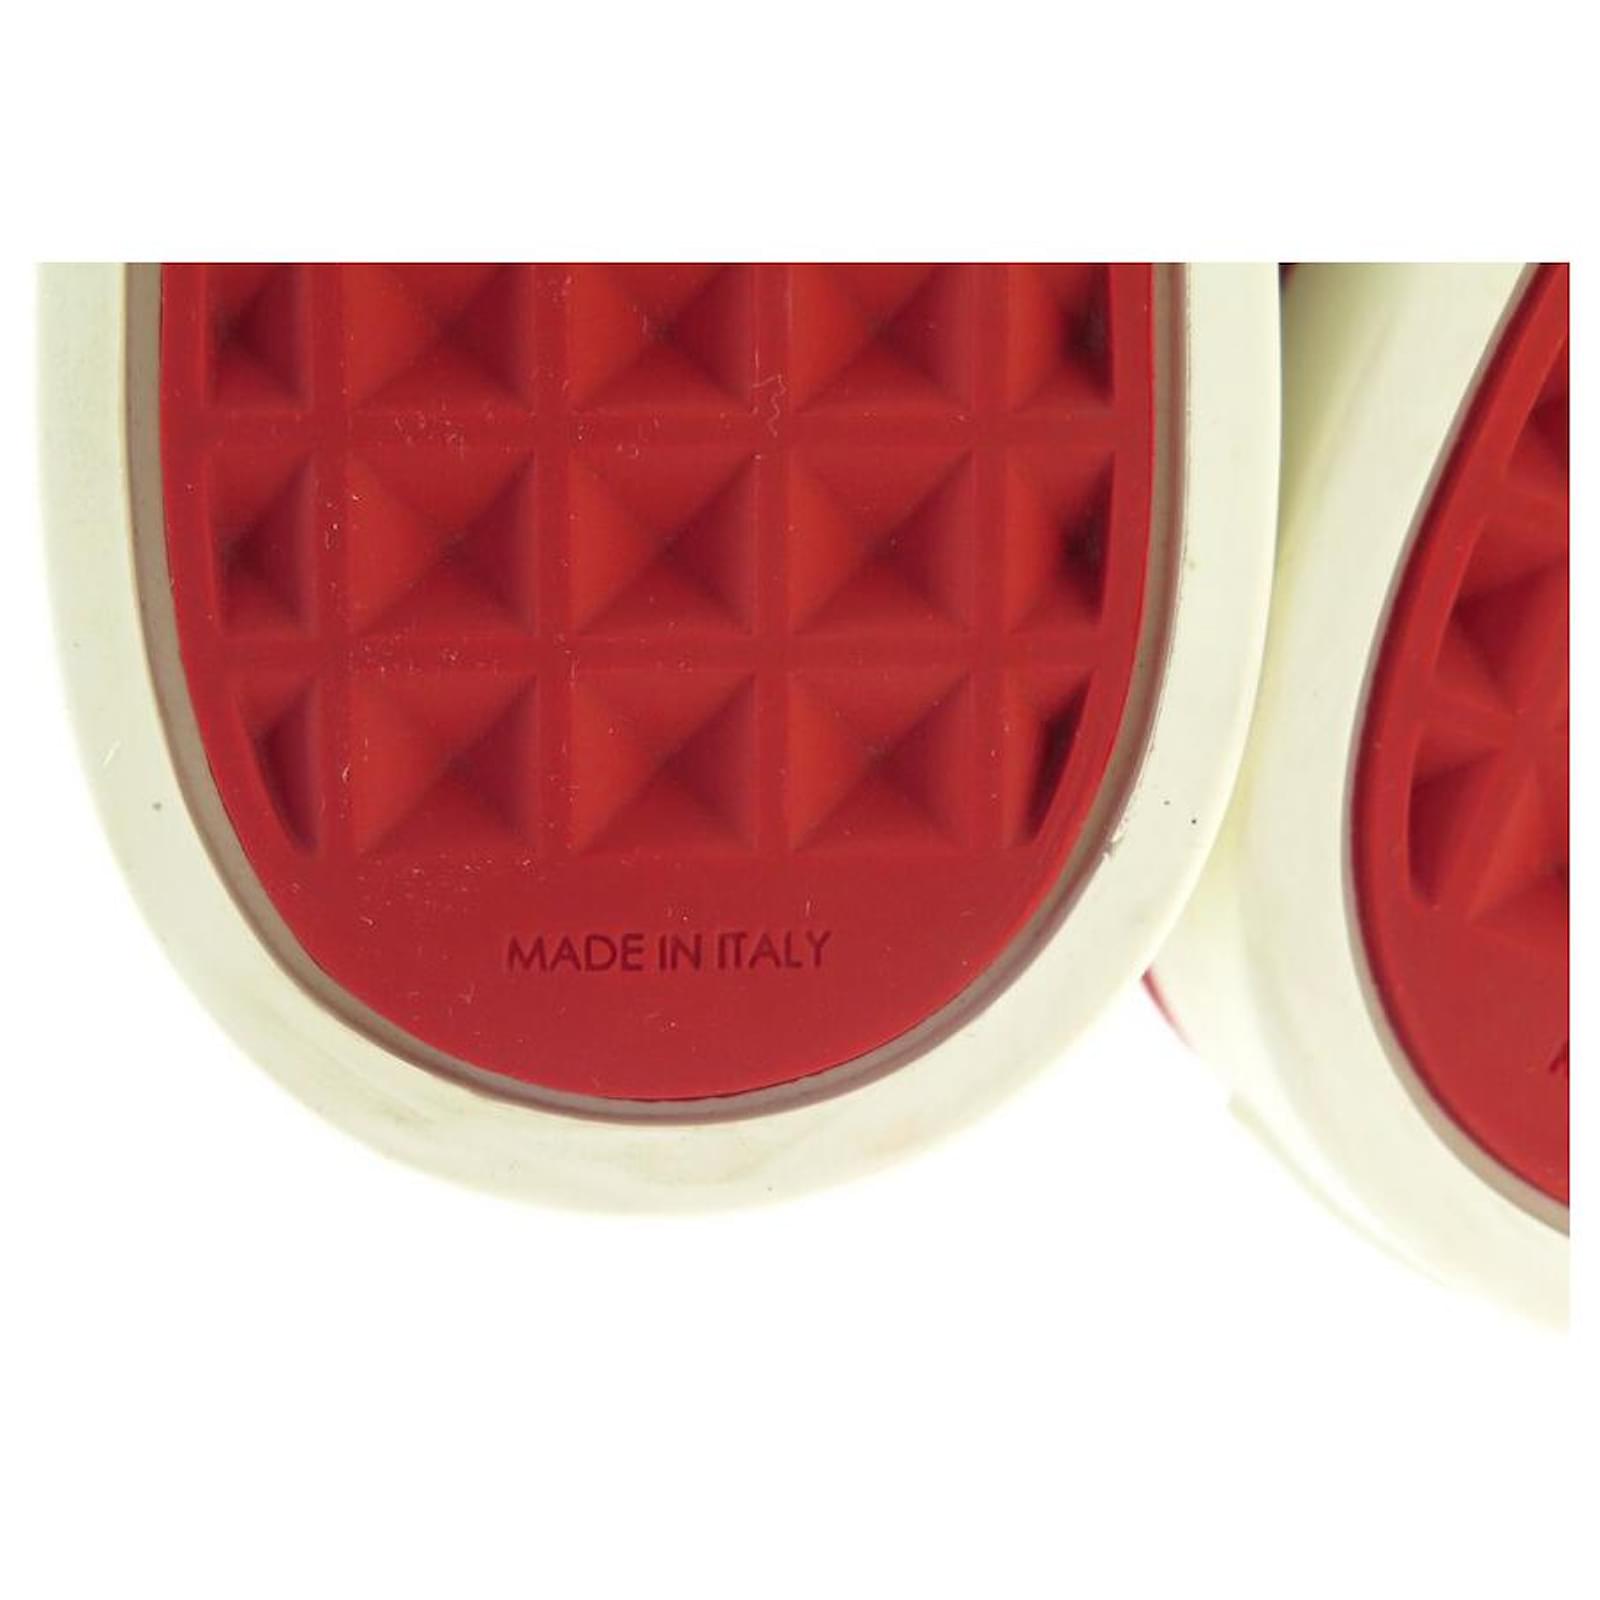 NEW LOUIS VUITTON BASKETS SLIP ON SHOES 36.5 RED PATENT LEATHER SHOES  ref.1019676 - Joli Closet